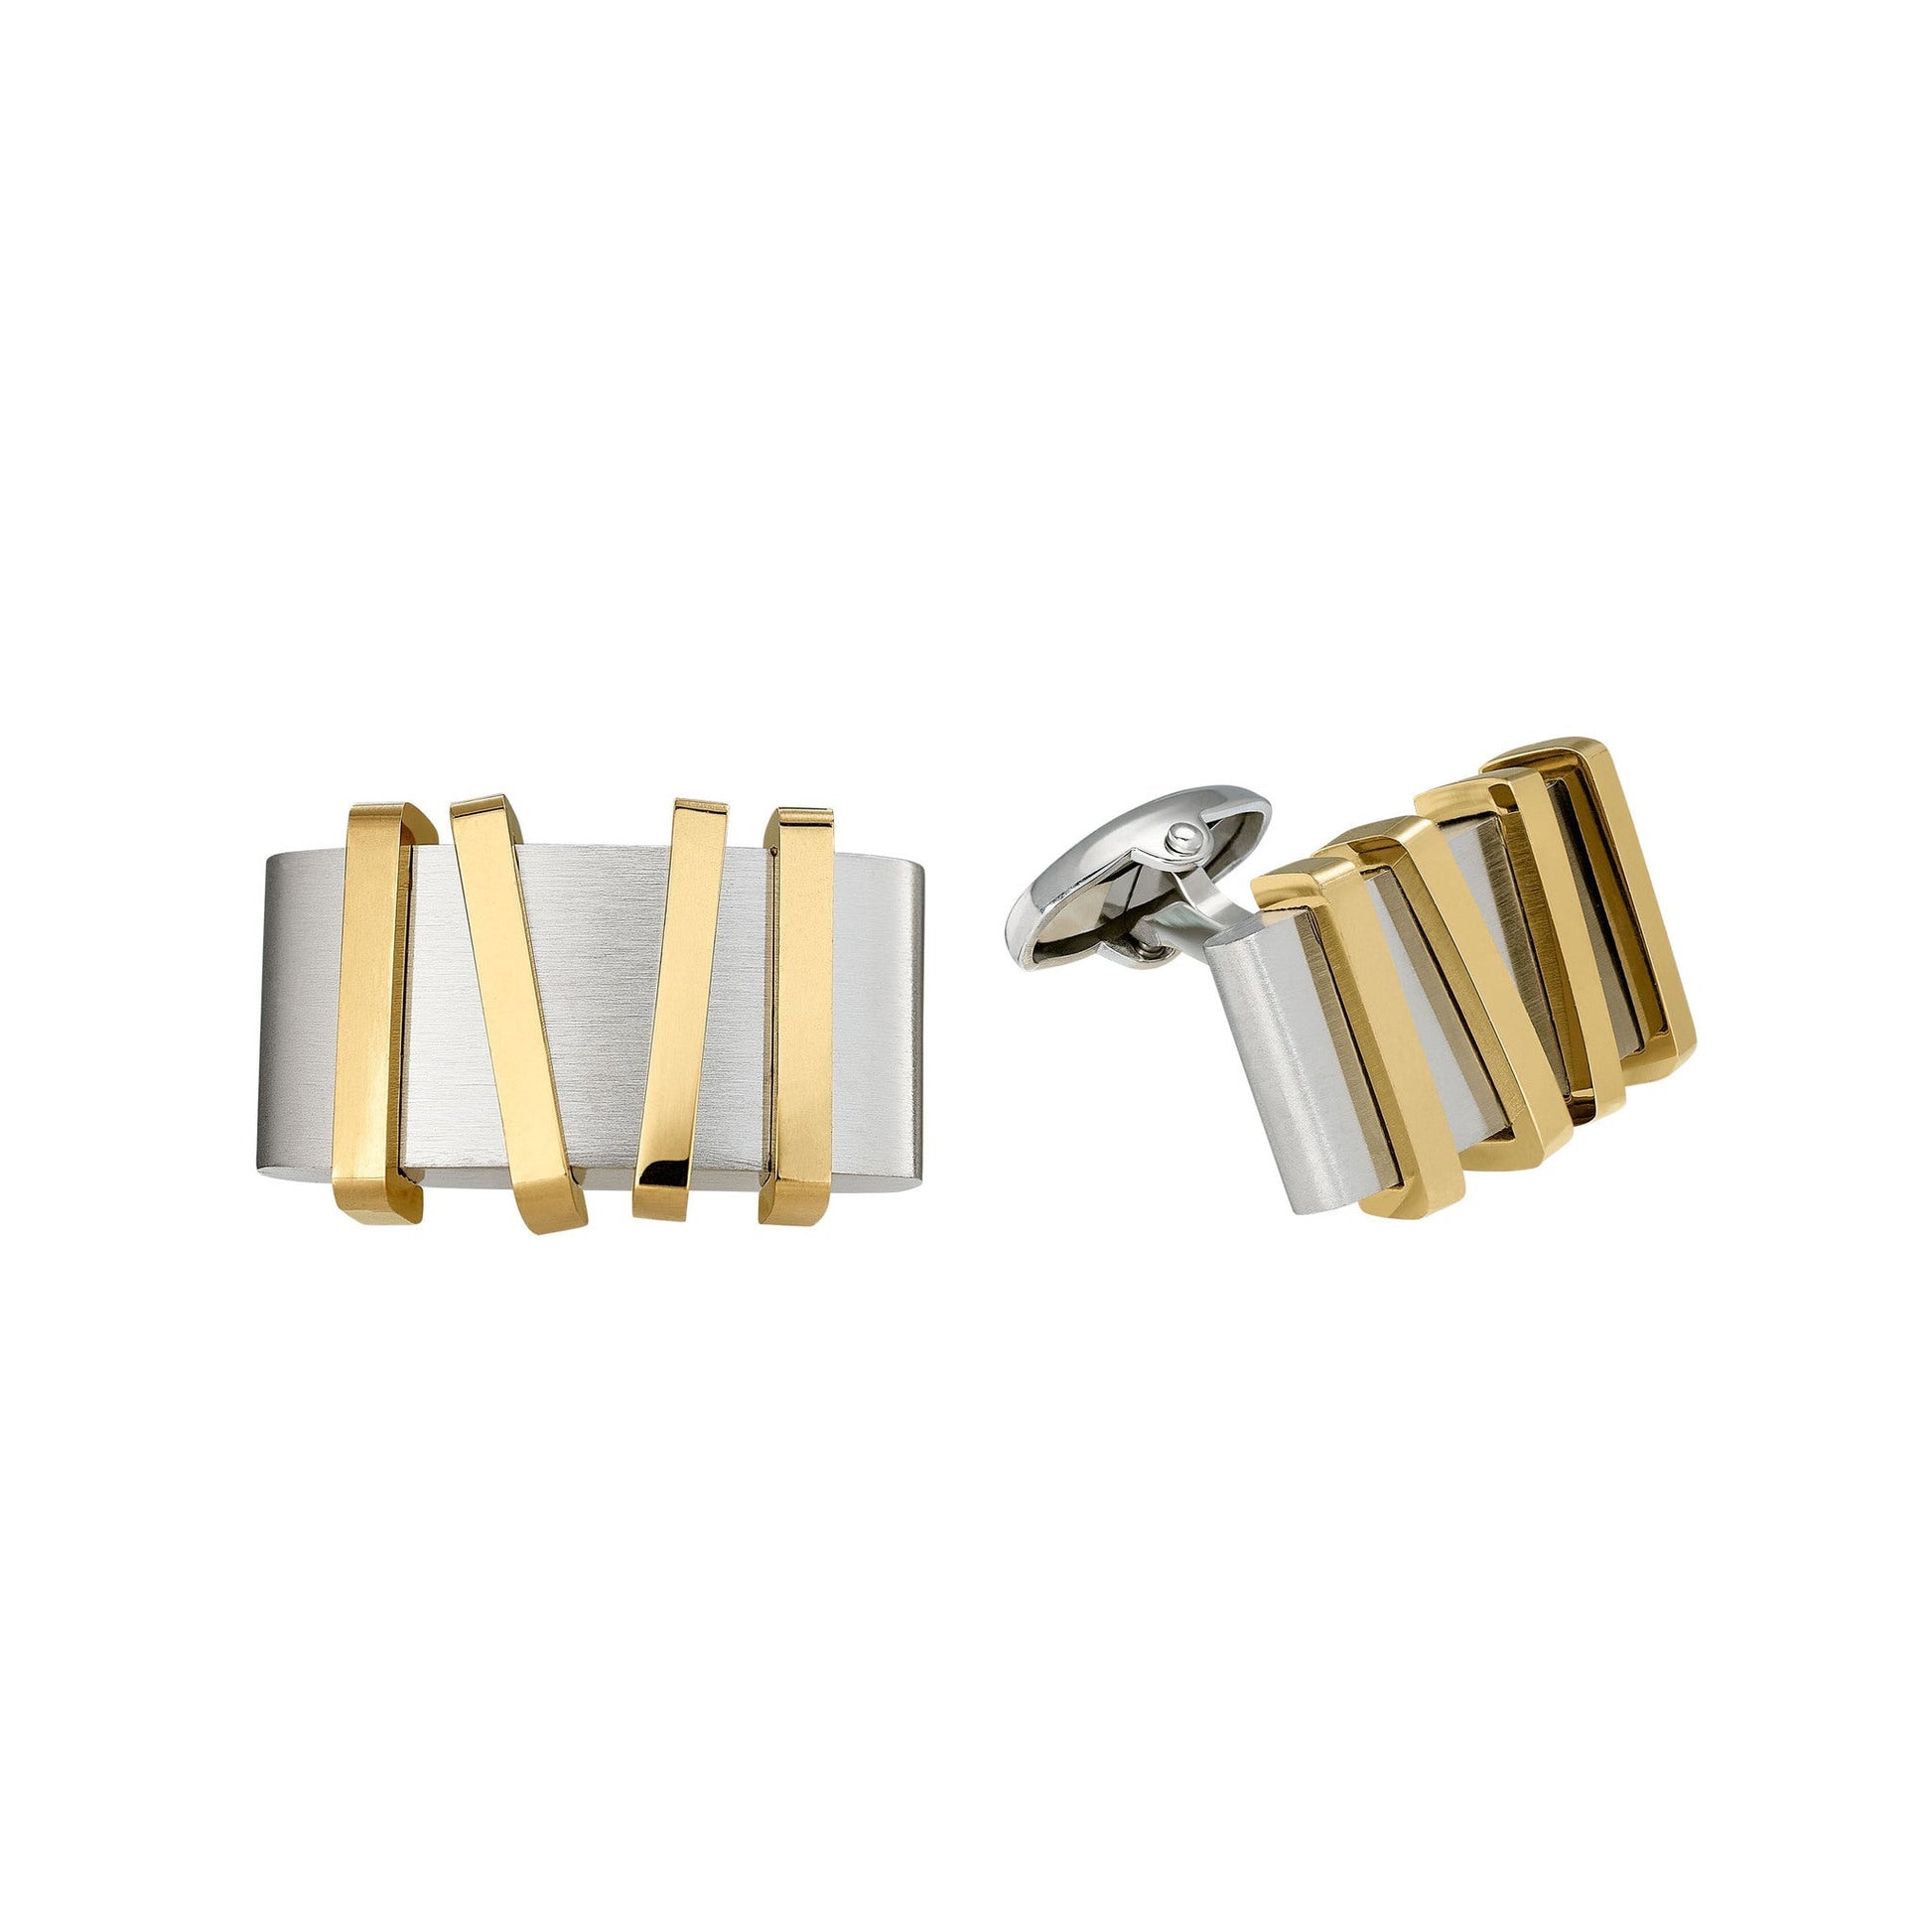 A stainless steel cufflinks with gold geometric stripes displayed on a neutral white background.